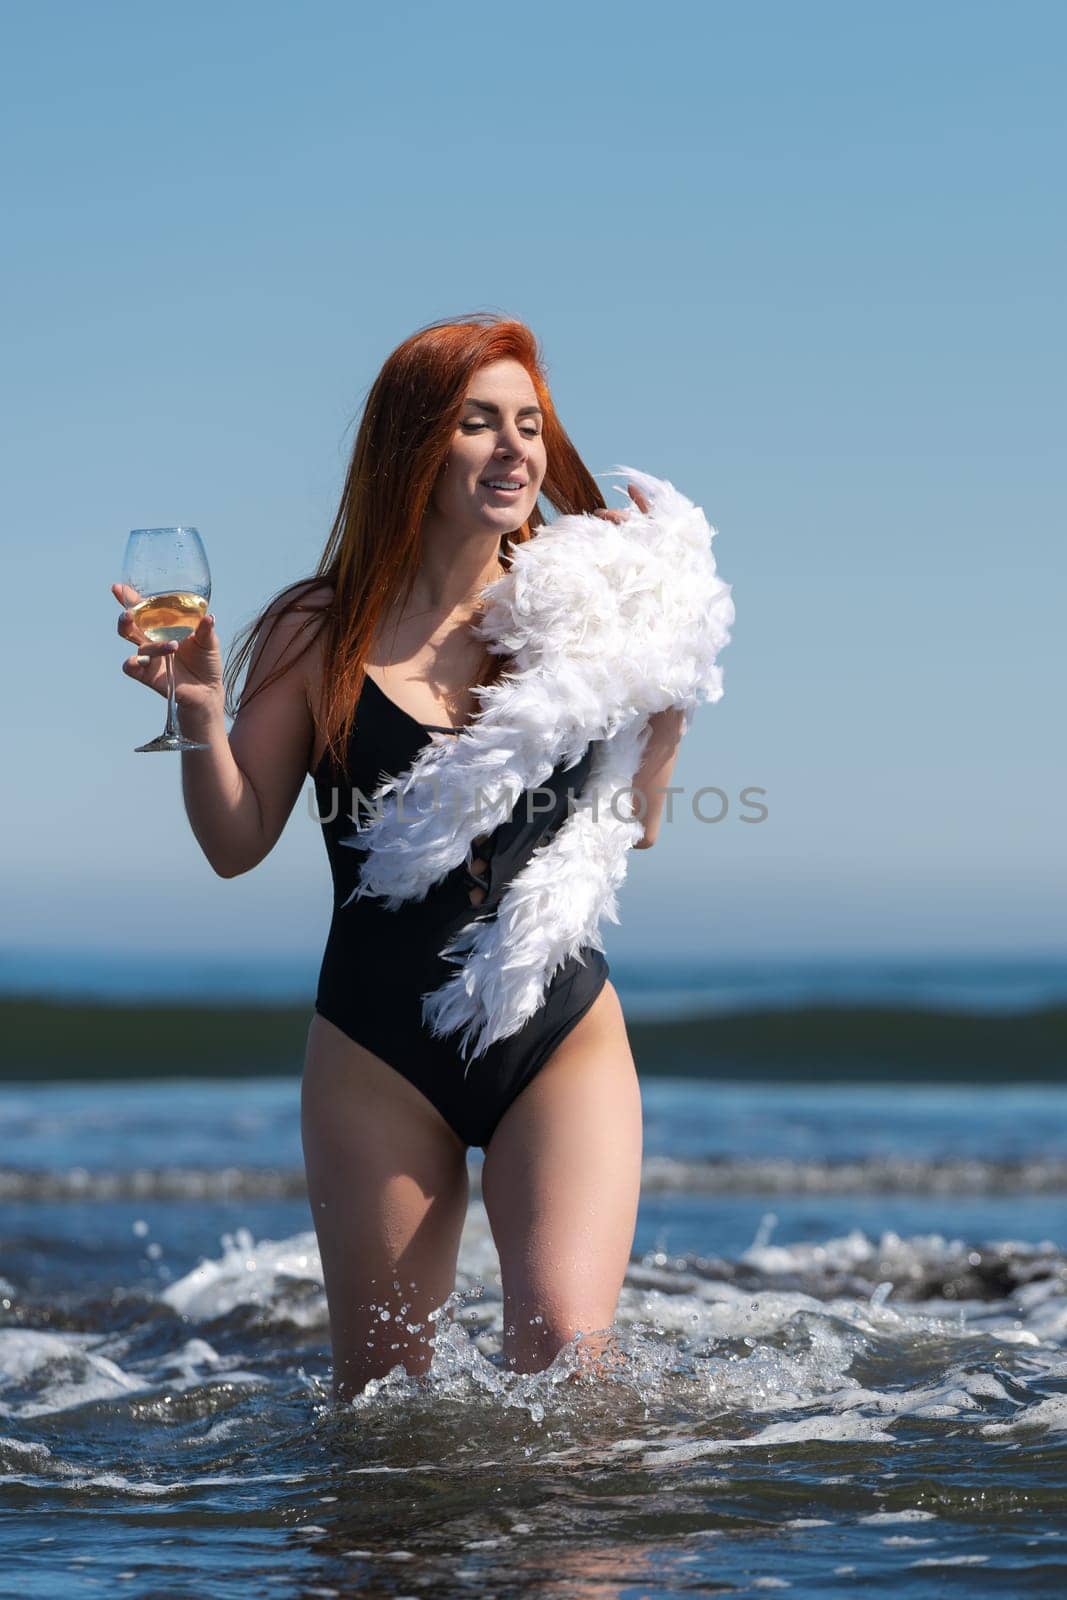 Redhead woman is walking knee deep in waves of ocean, looking fabulous in black one piece swimsuit. And check out that wine glass in one hand and boa in other - she's definitely living her best life